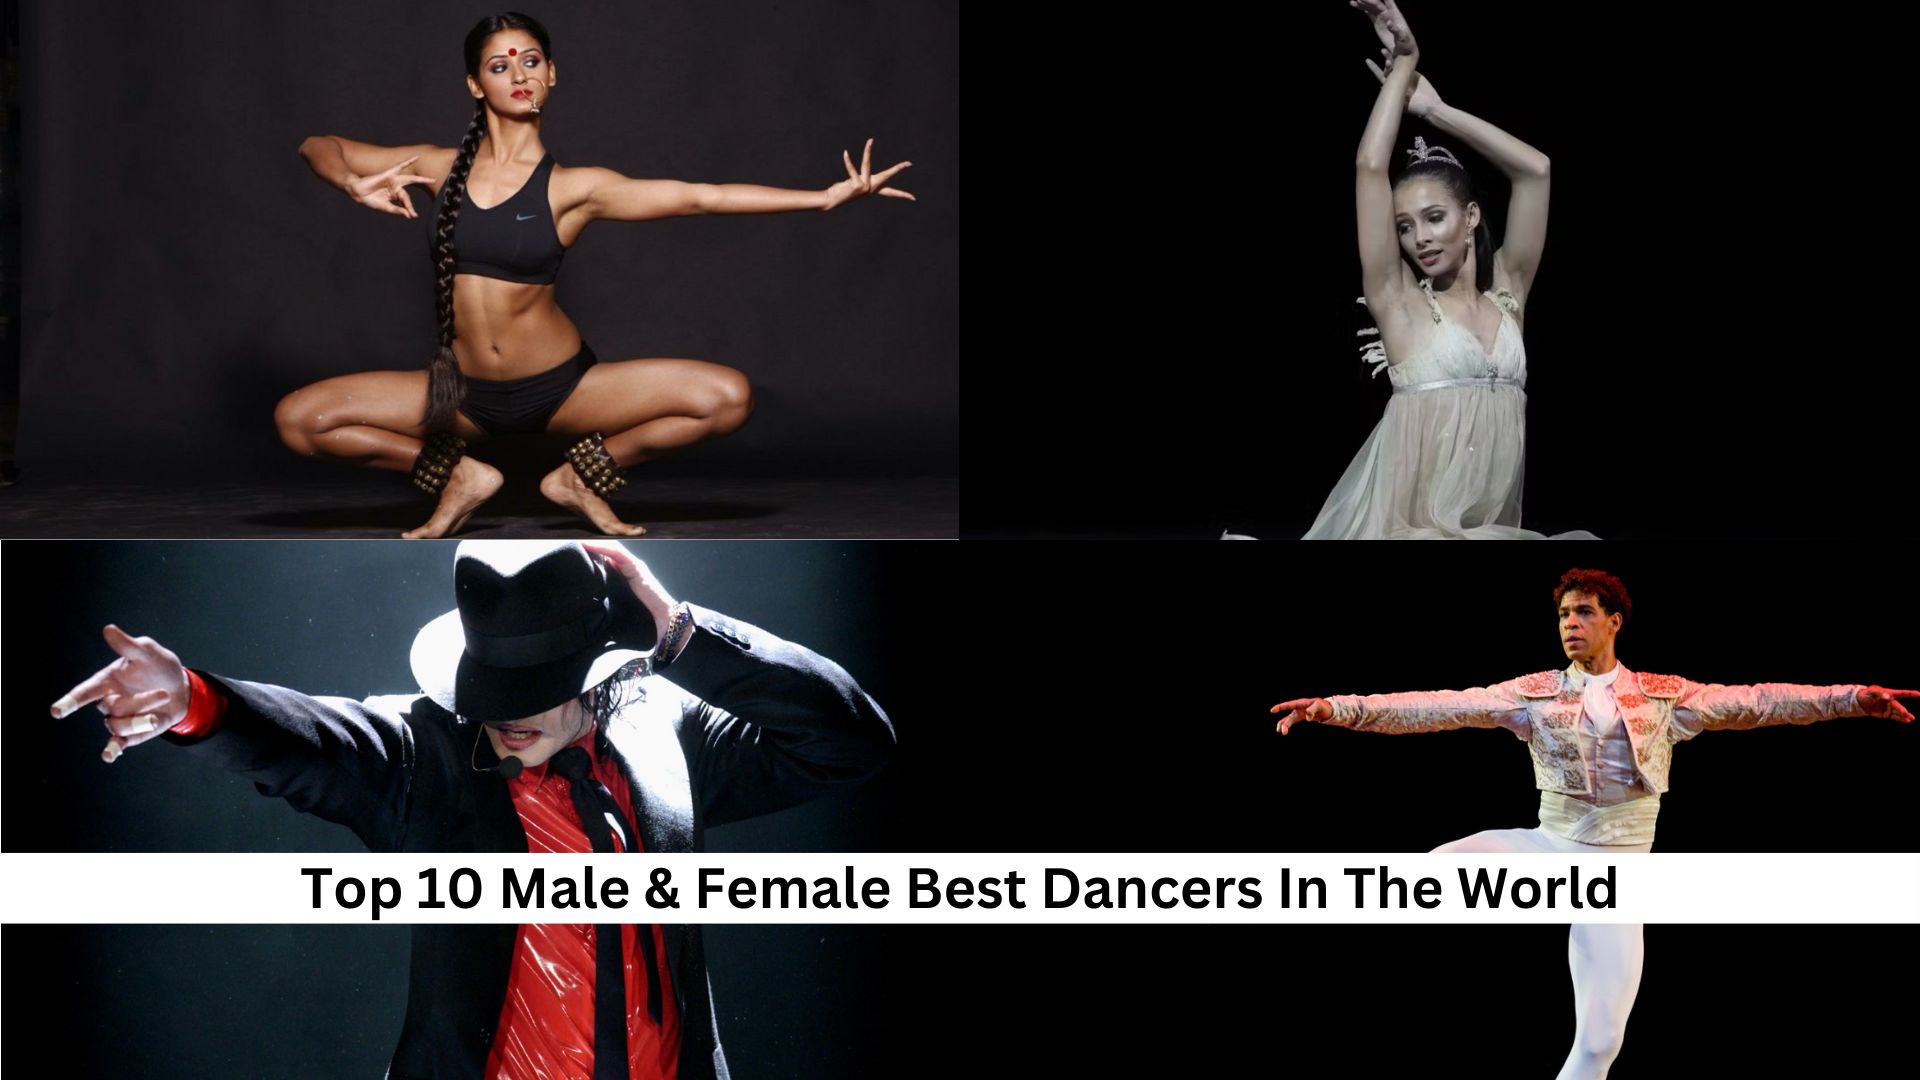 Top 10 Male & Female Best Dancers In The World